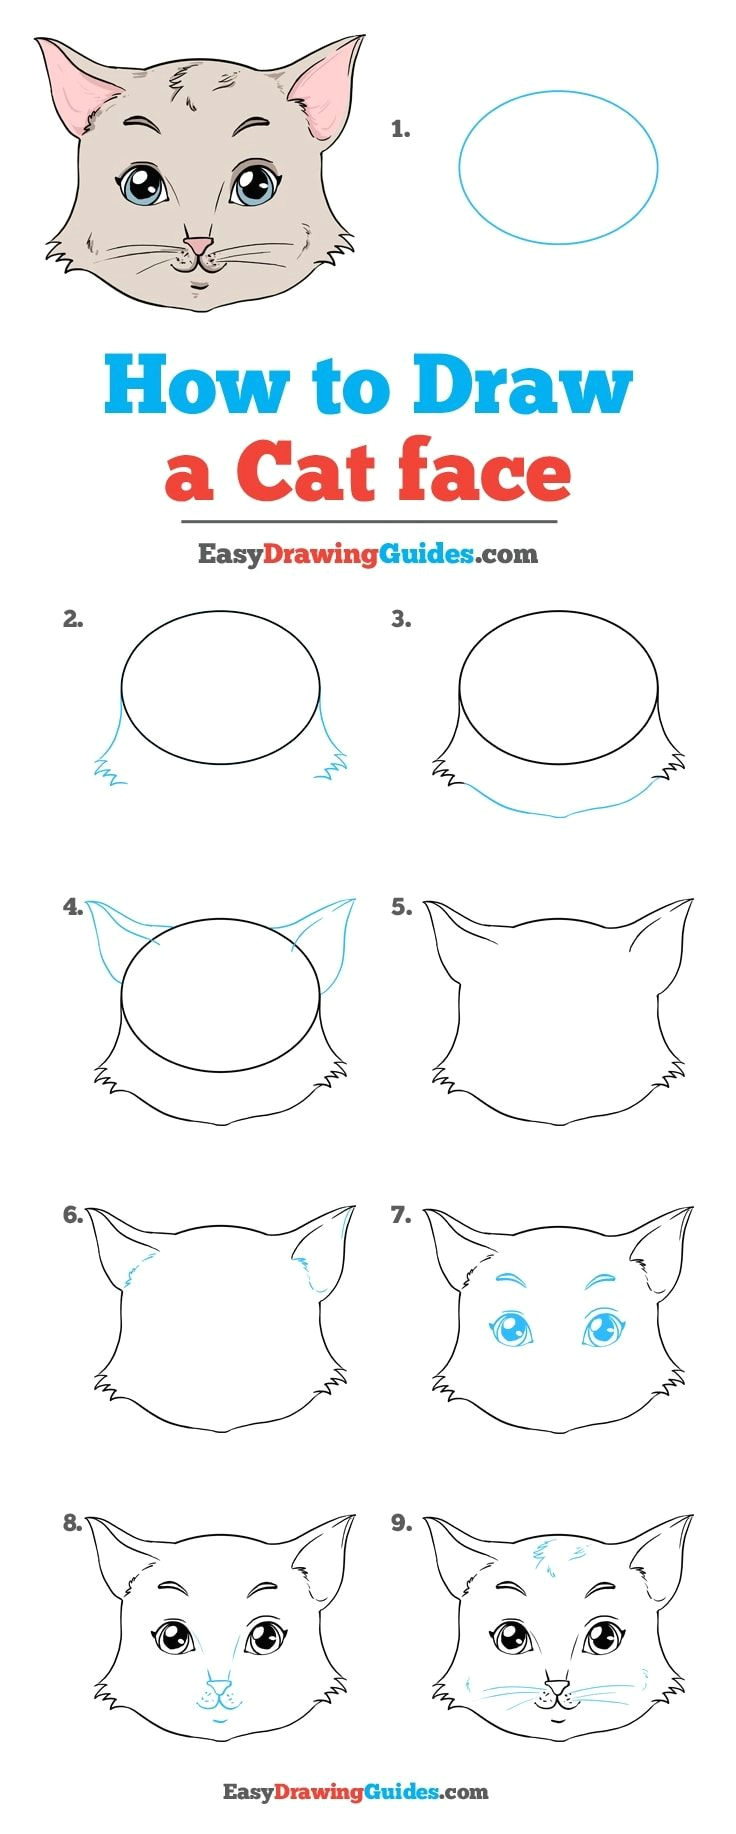 Easy Way to Draw A Face How to Draw A Cat Face Malen Gesichter Zeichnen